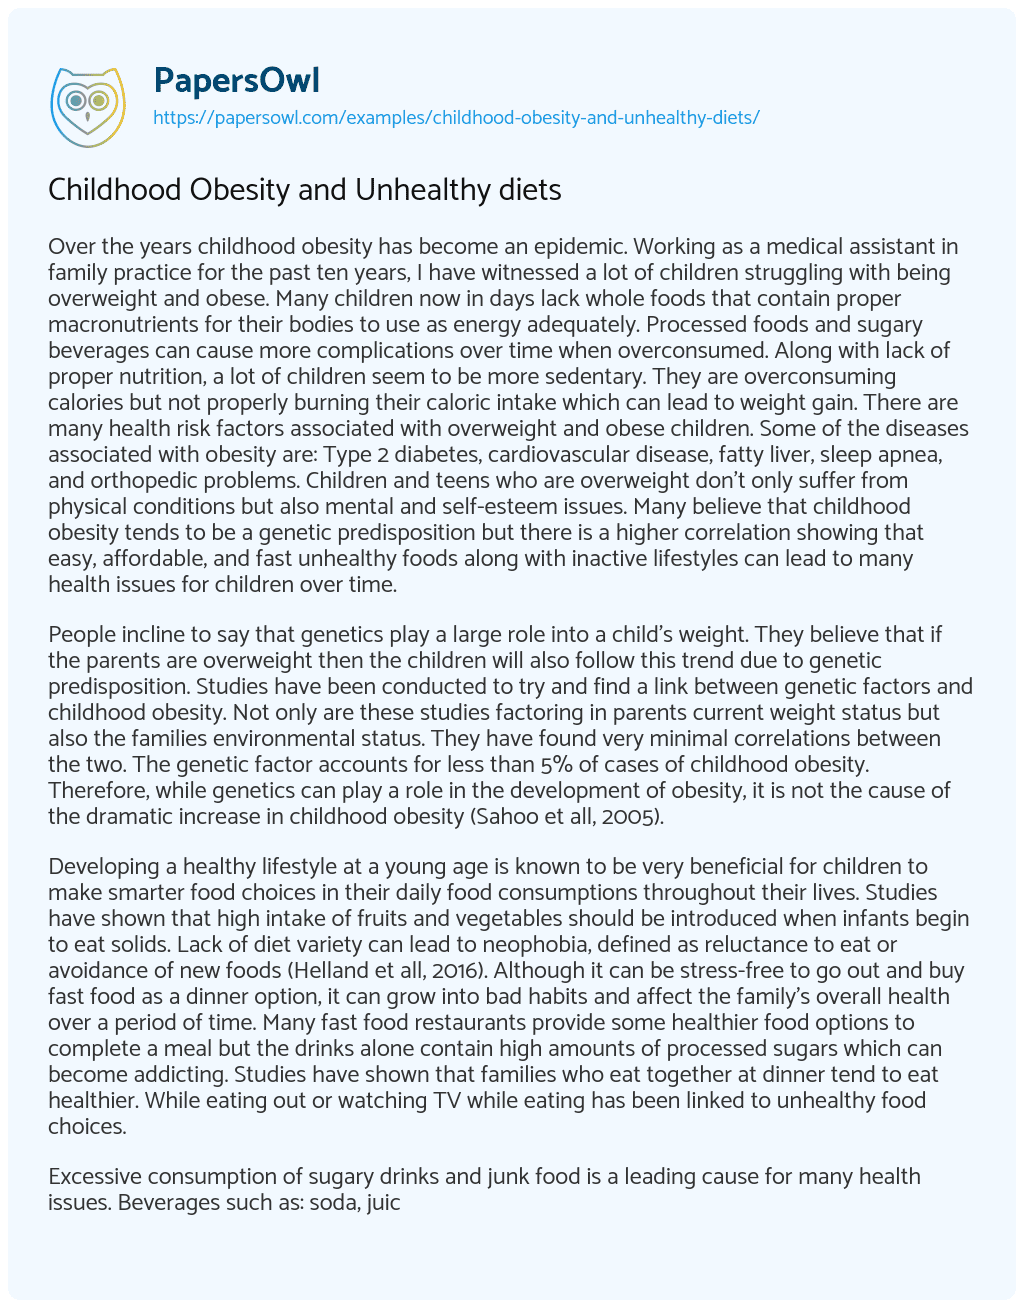 Essay on Childhood Obesity and Unhealthy Diets